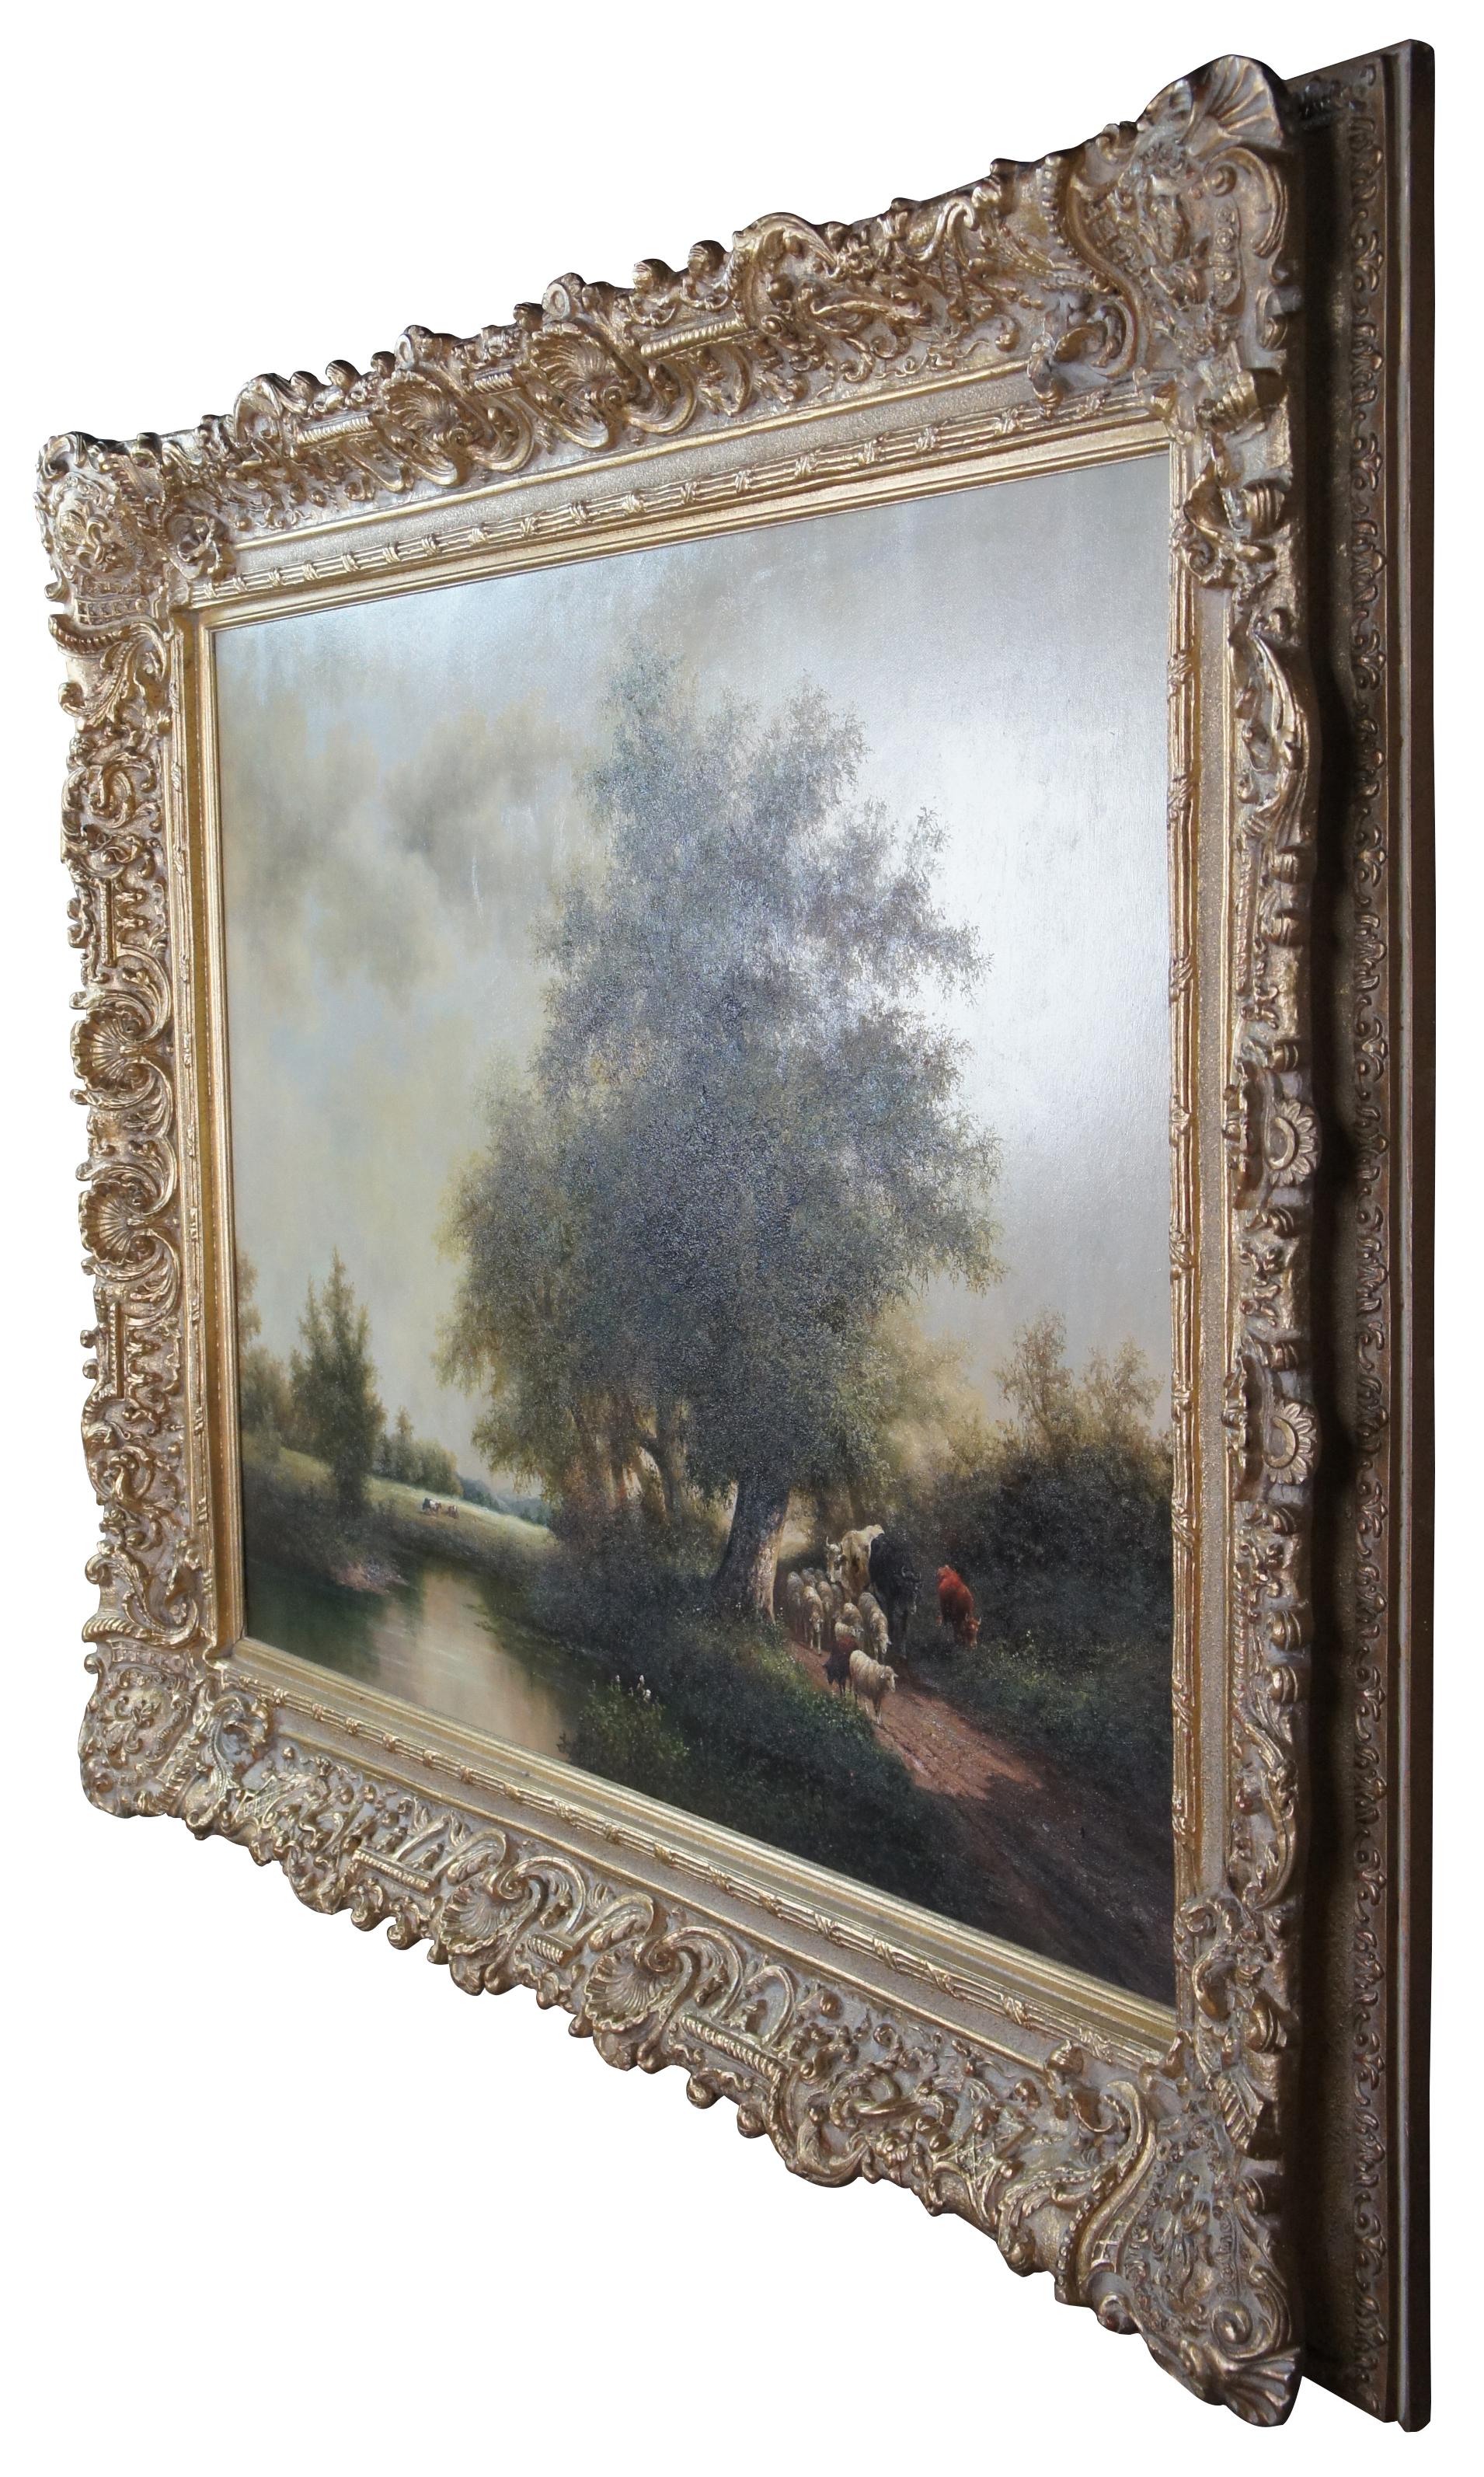 An impressive original vintage Impressionist landscape oil painting featuring cows and sheep grazing on a pasture or farm along a dirt road and lake. The ornate baroque gold frame features scalloping, shells, fleur de lis, and fluted ribbon accents.